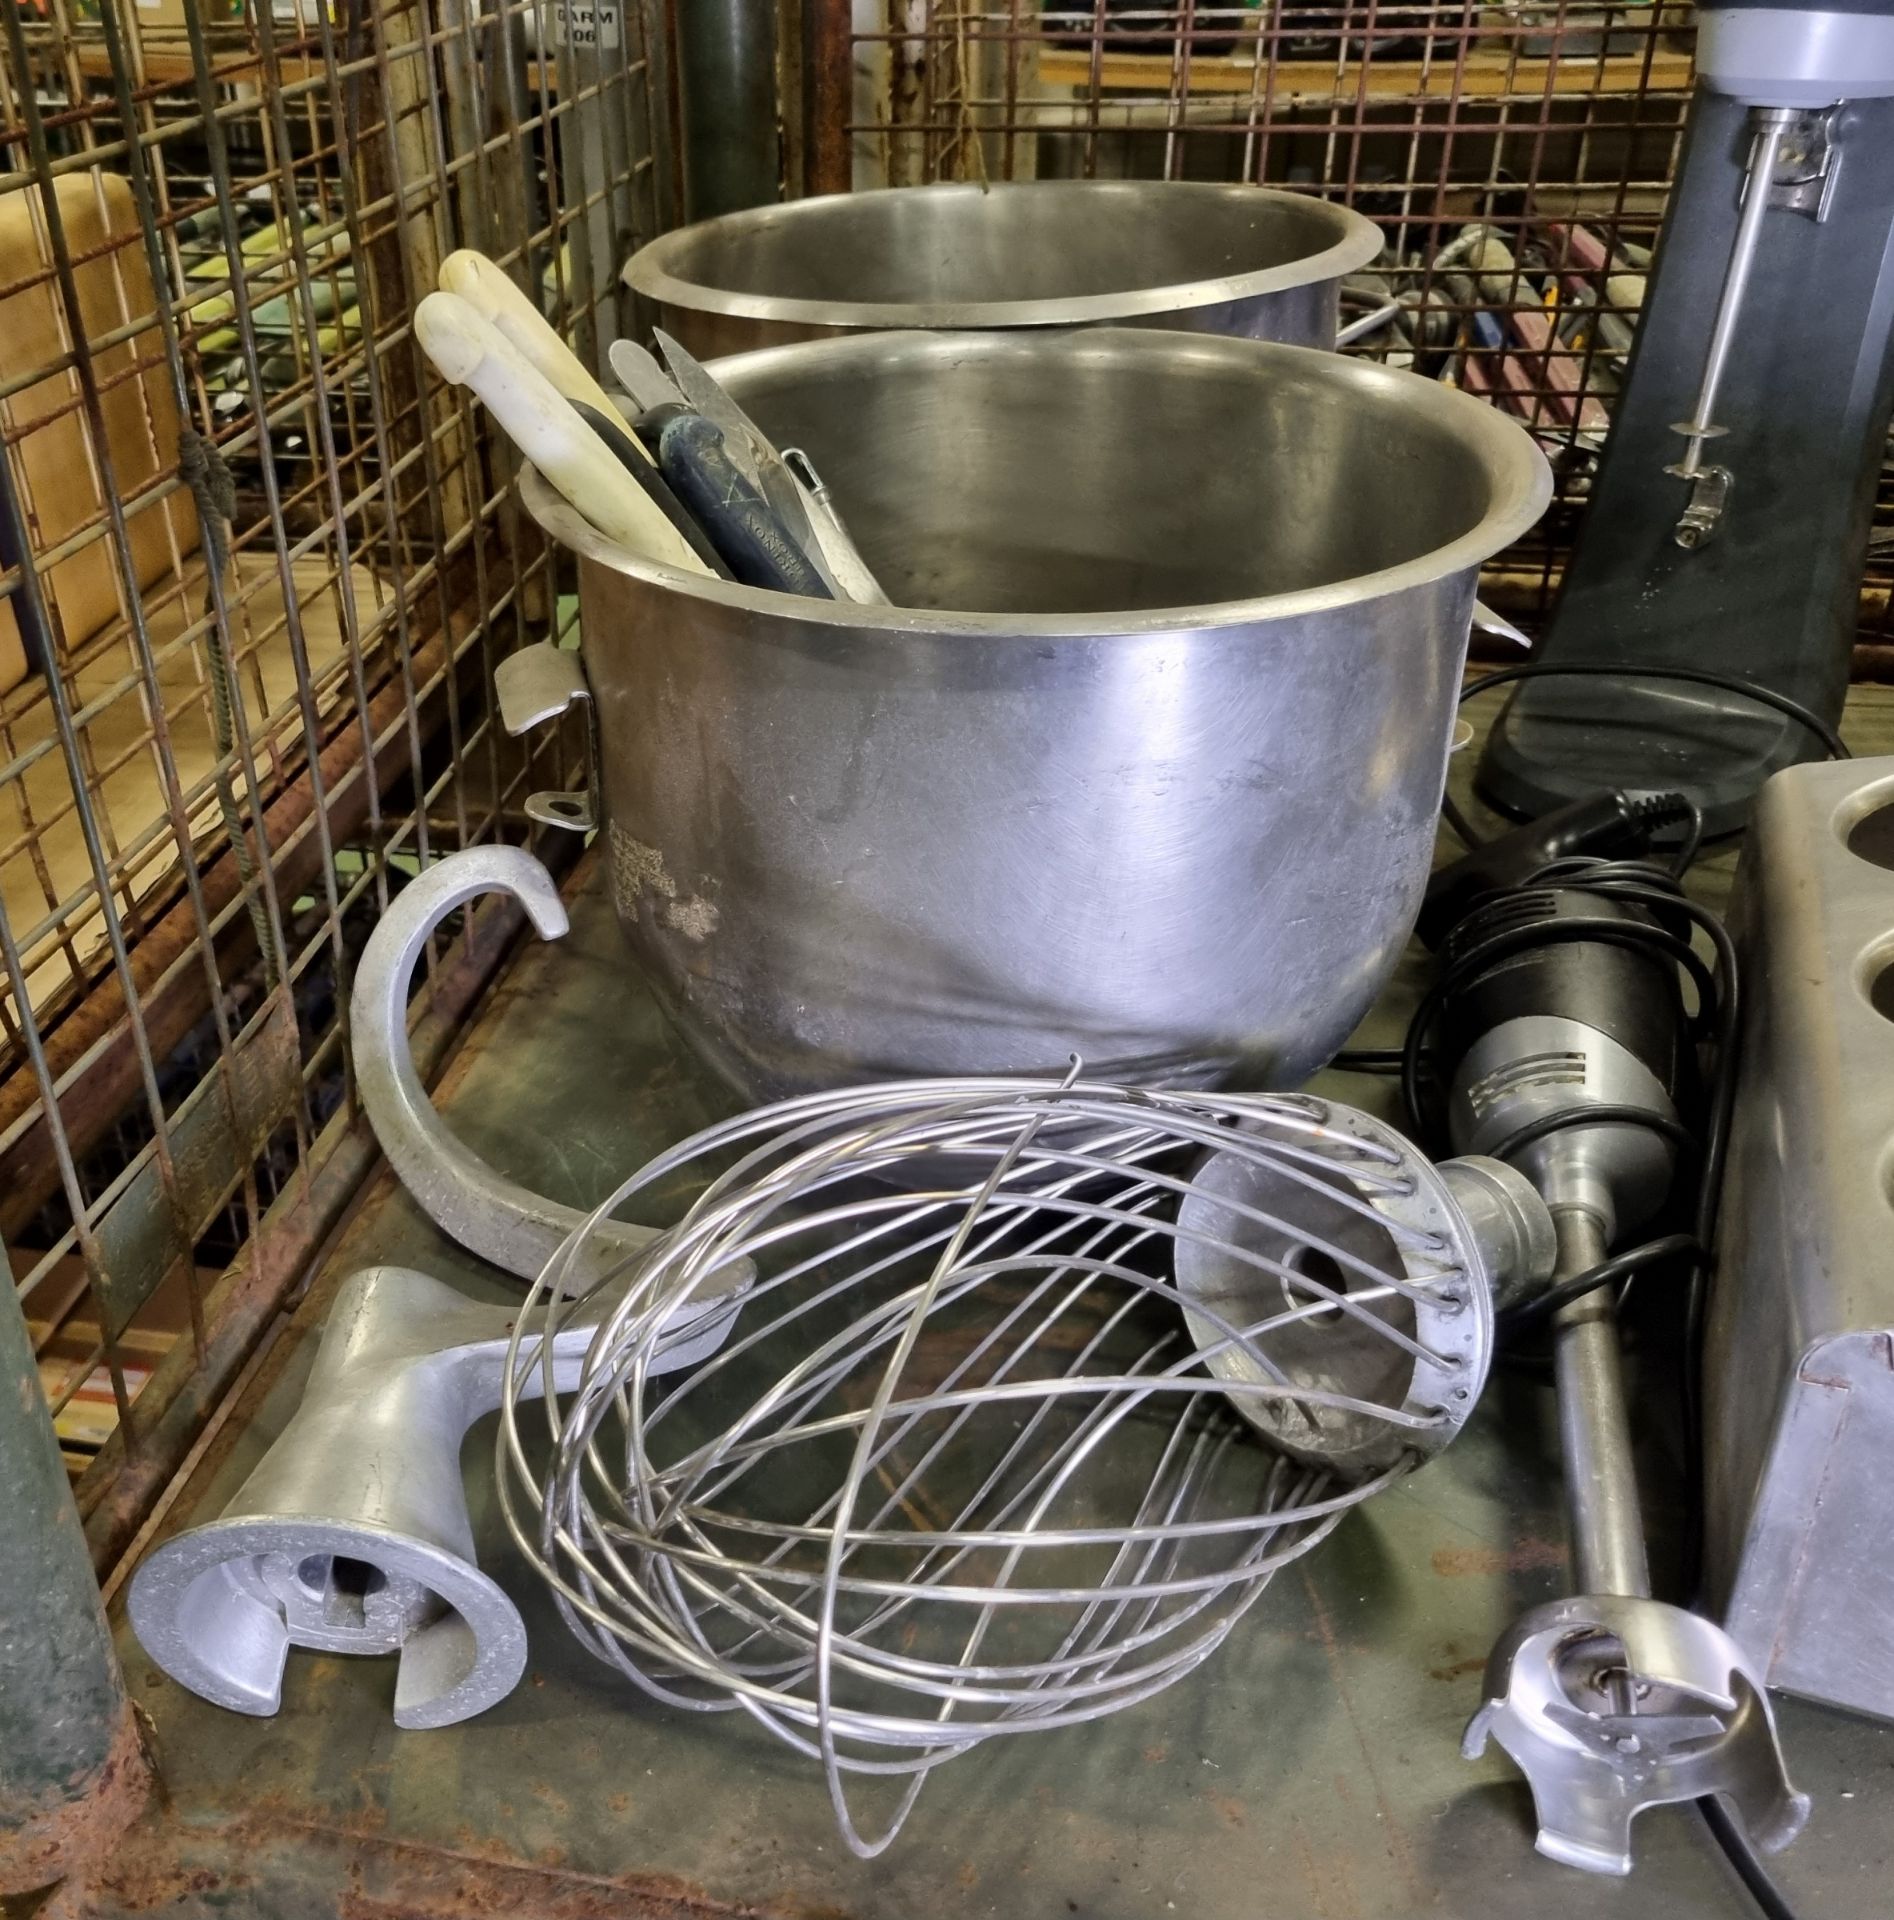 Catering equipment - mixing bowls, mixing attachments, milkshake machines and gastronorm pan lids - Bild 4 aus 6